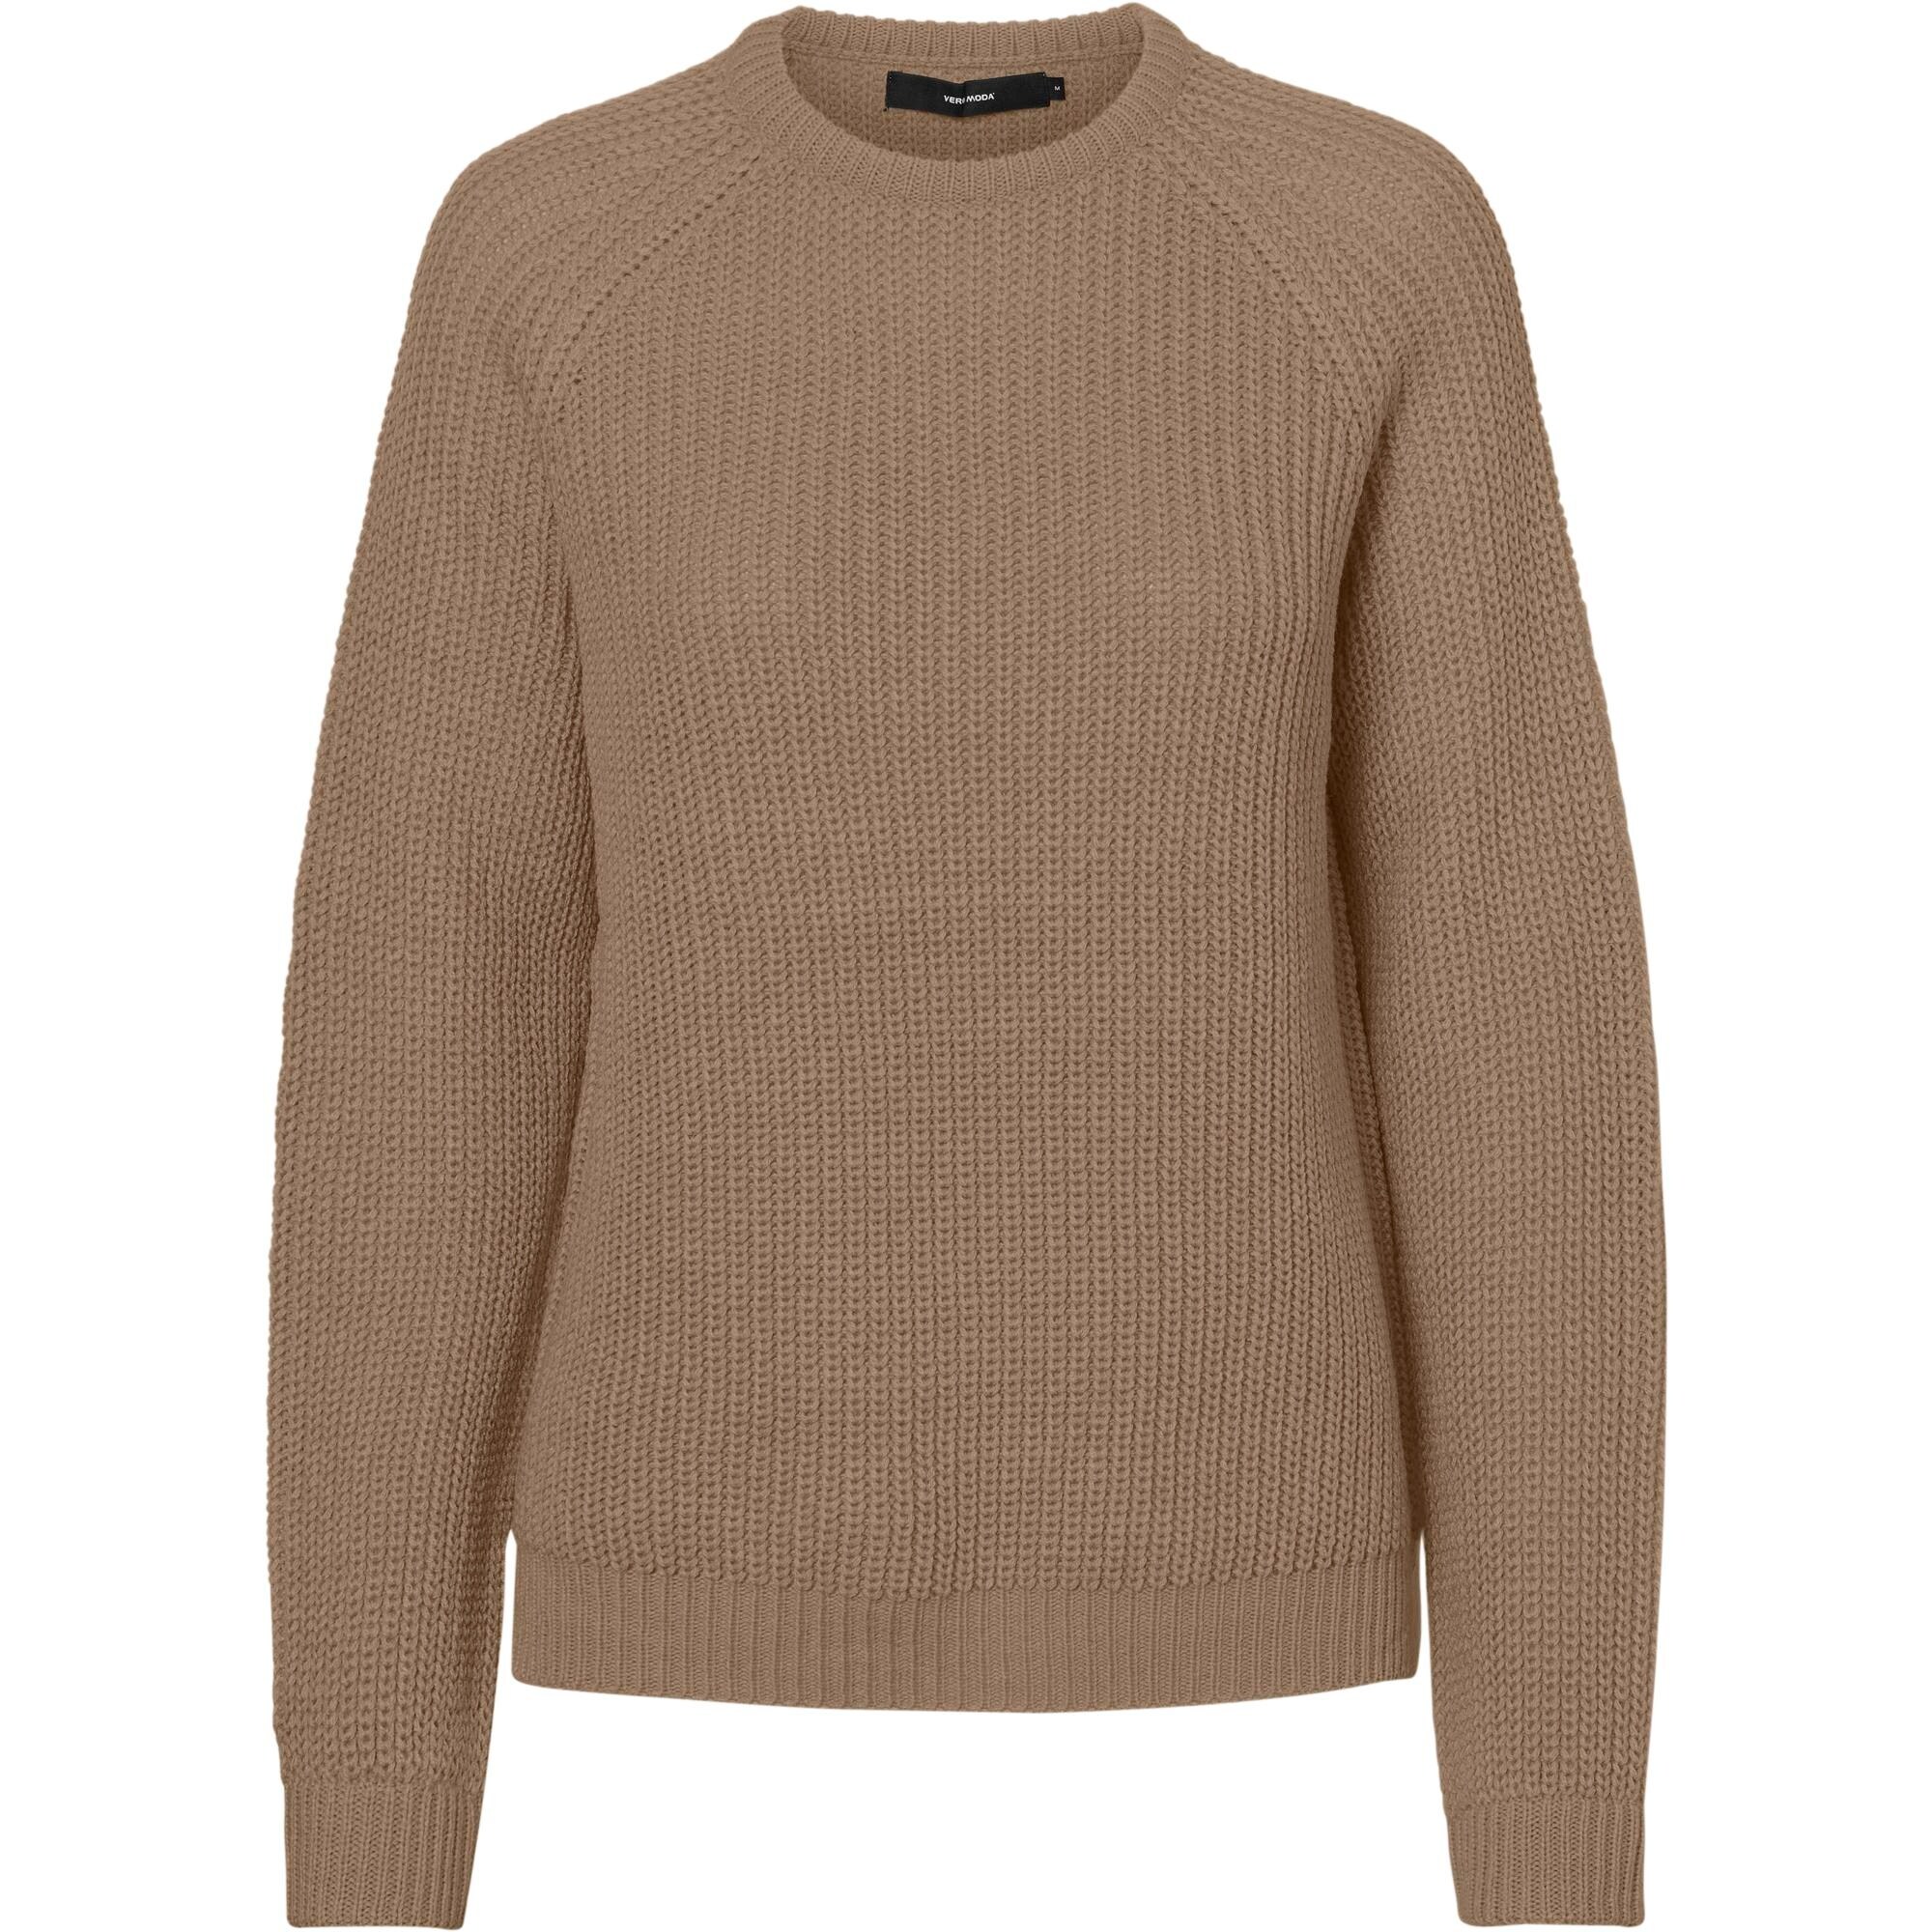 Vero Moda Women's Ribbed Knit High Neck Fitted Sweater from Moda | AccuWeather Shop